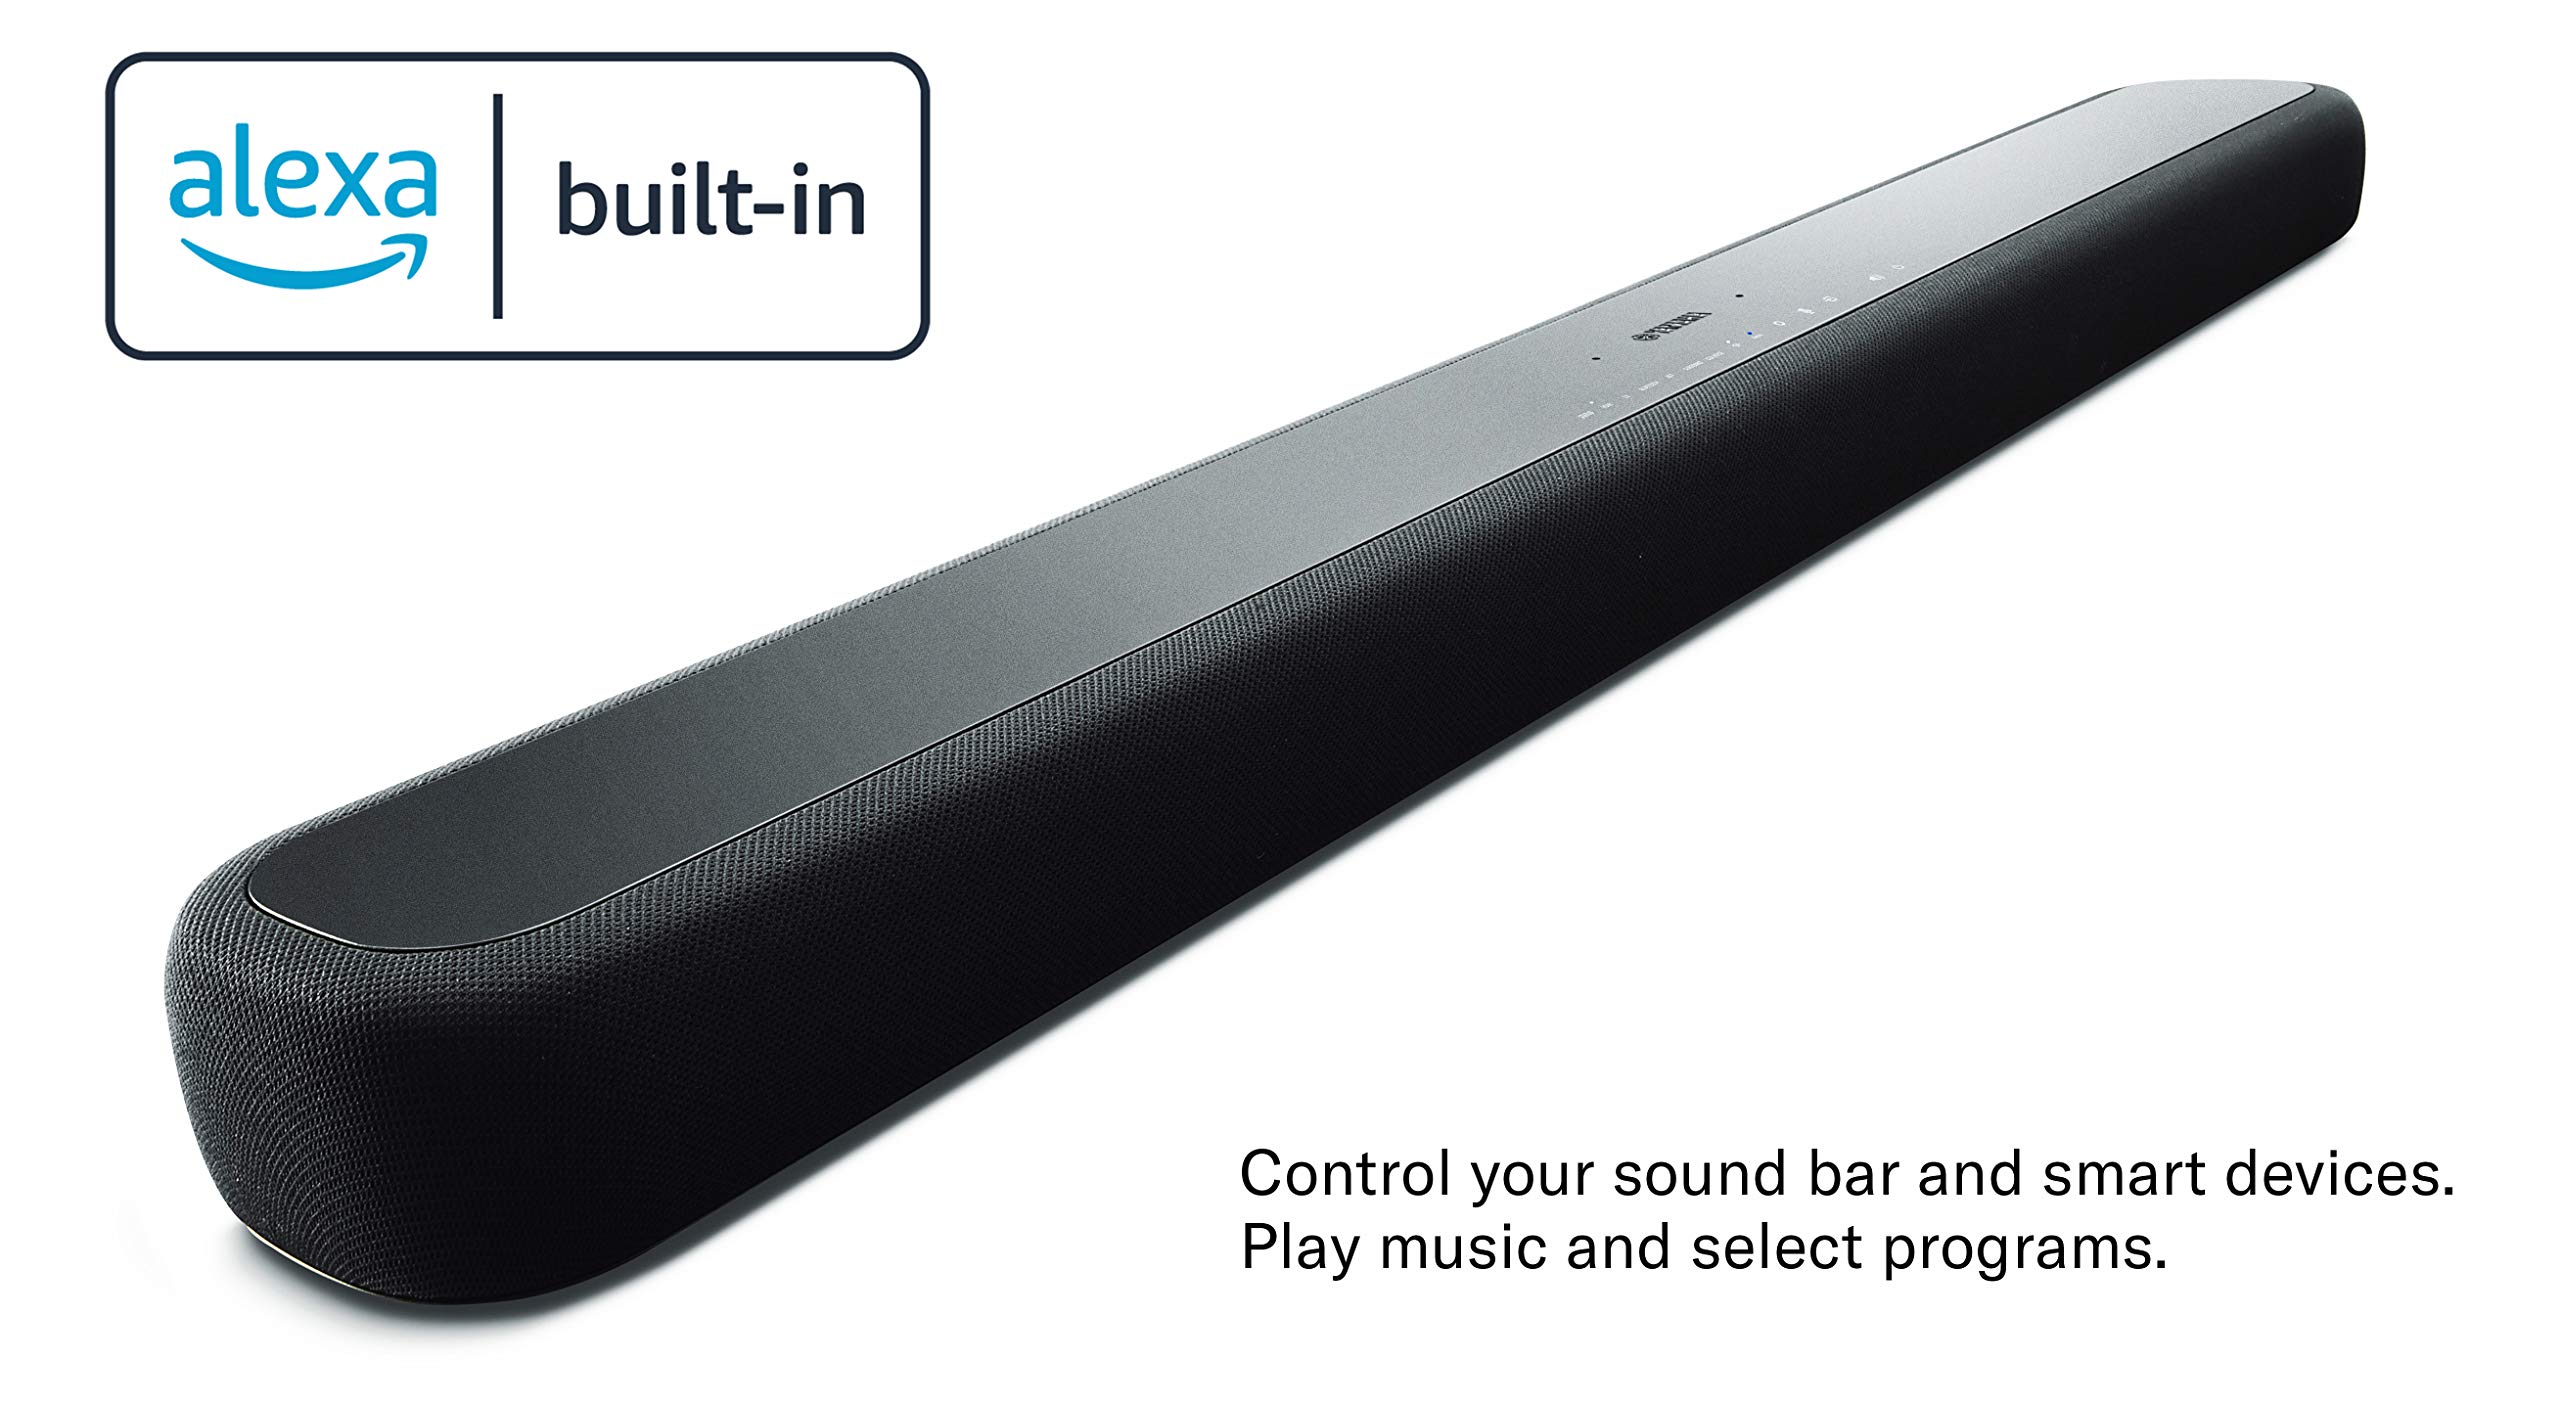 Yamaha ATS-2090 Sound Bar with Wireless Subwoofer, Bluetooth, and Alexa Voice Control Built-in (Renewed), Black